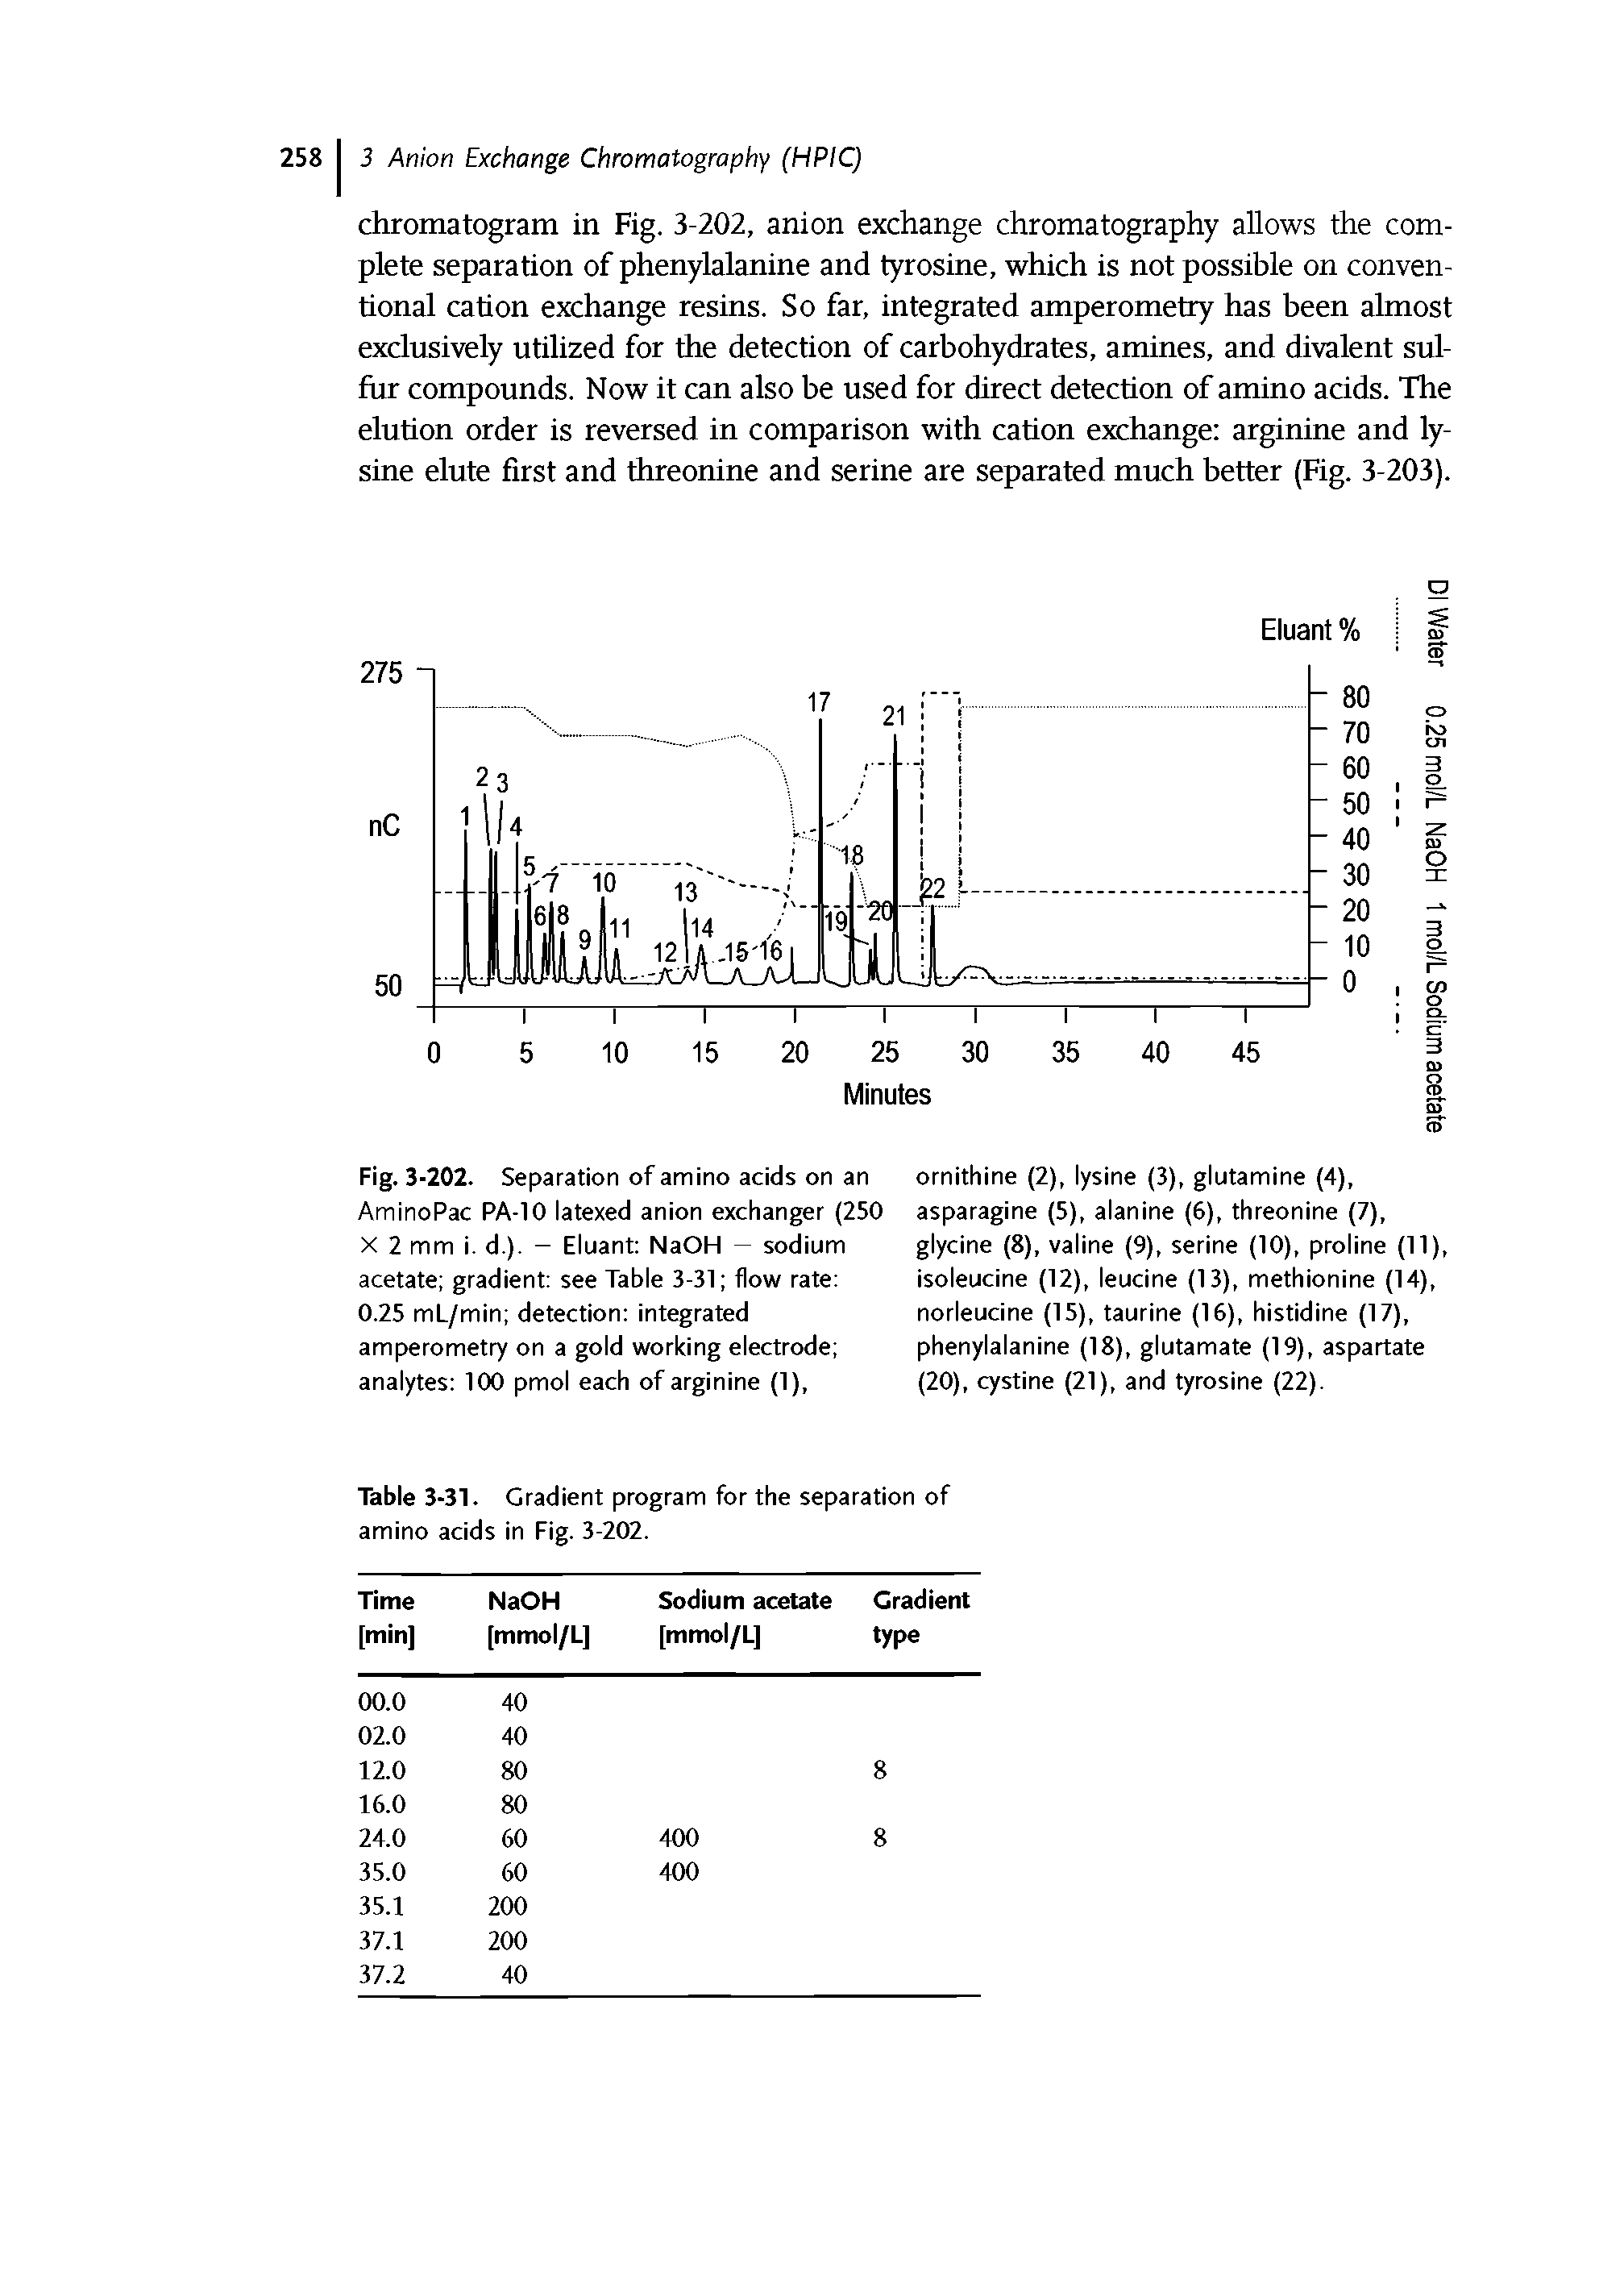 Fig. 3-202. Separation of amino acids on an AminoPac PA-10 latexed anion exchanger (250 X 2 mm i. d.). - Eluant NaOH — sodium acetate gradient see Table 3-31 flow rate 0.25 mL/min detection integrated amperometry on a gold working electrode analytes 100 pmol each of arginine (1),...